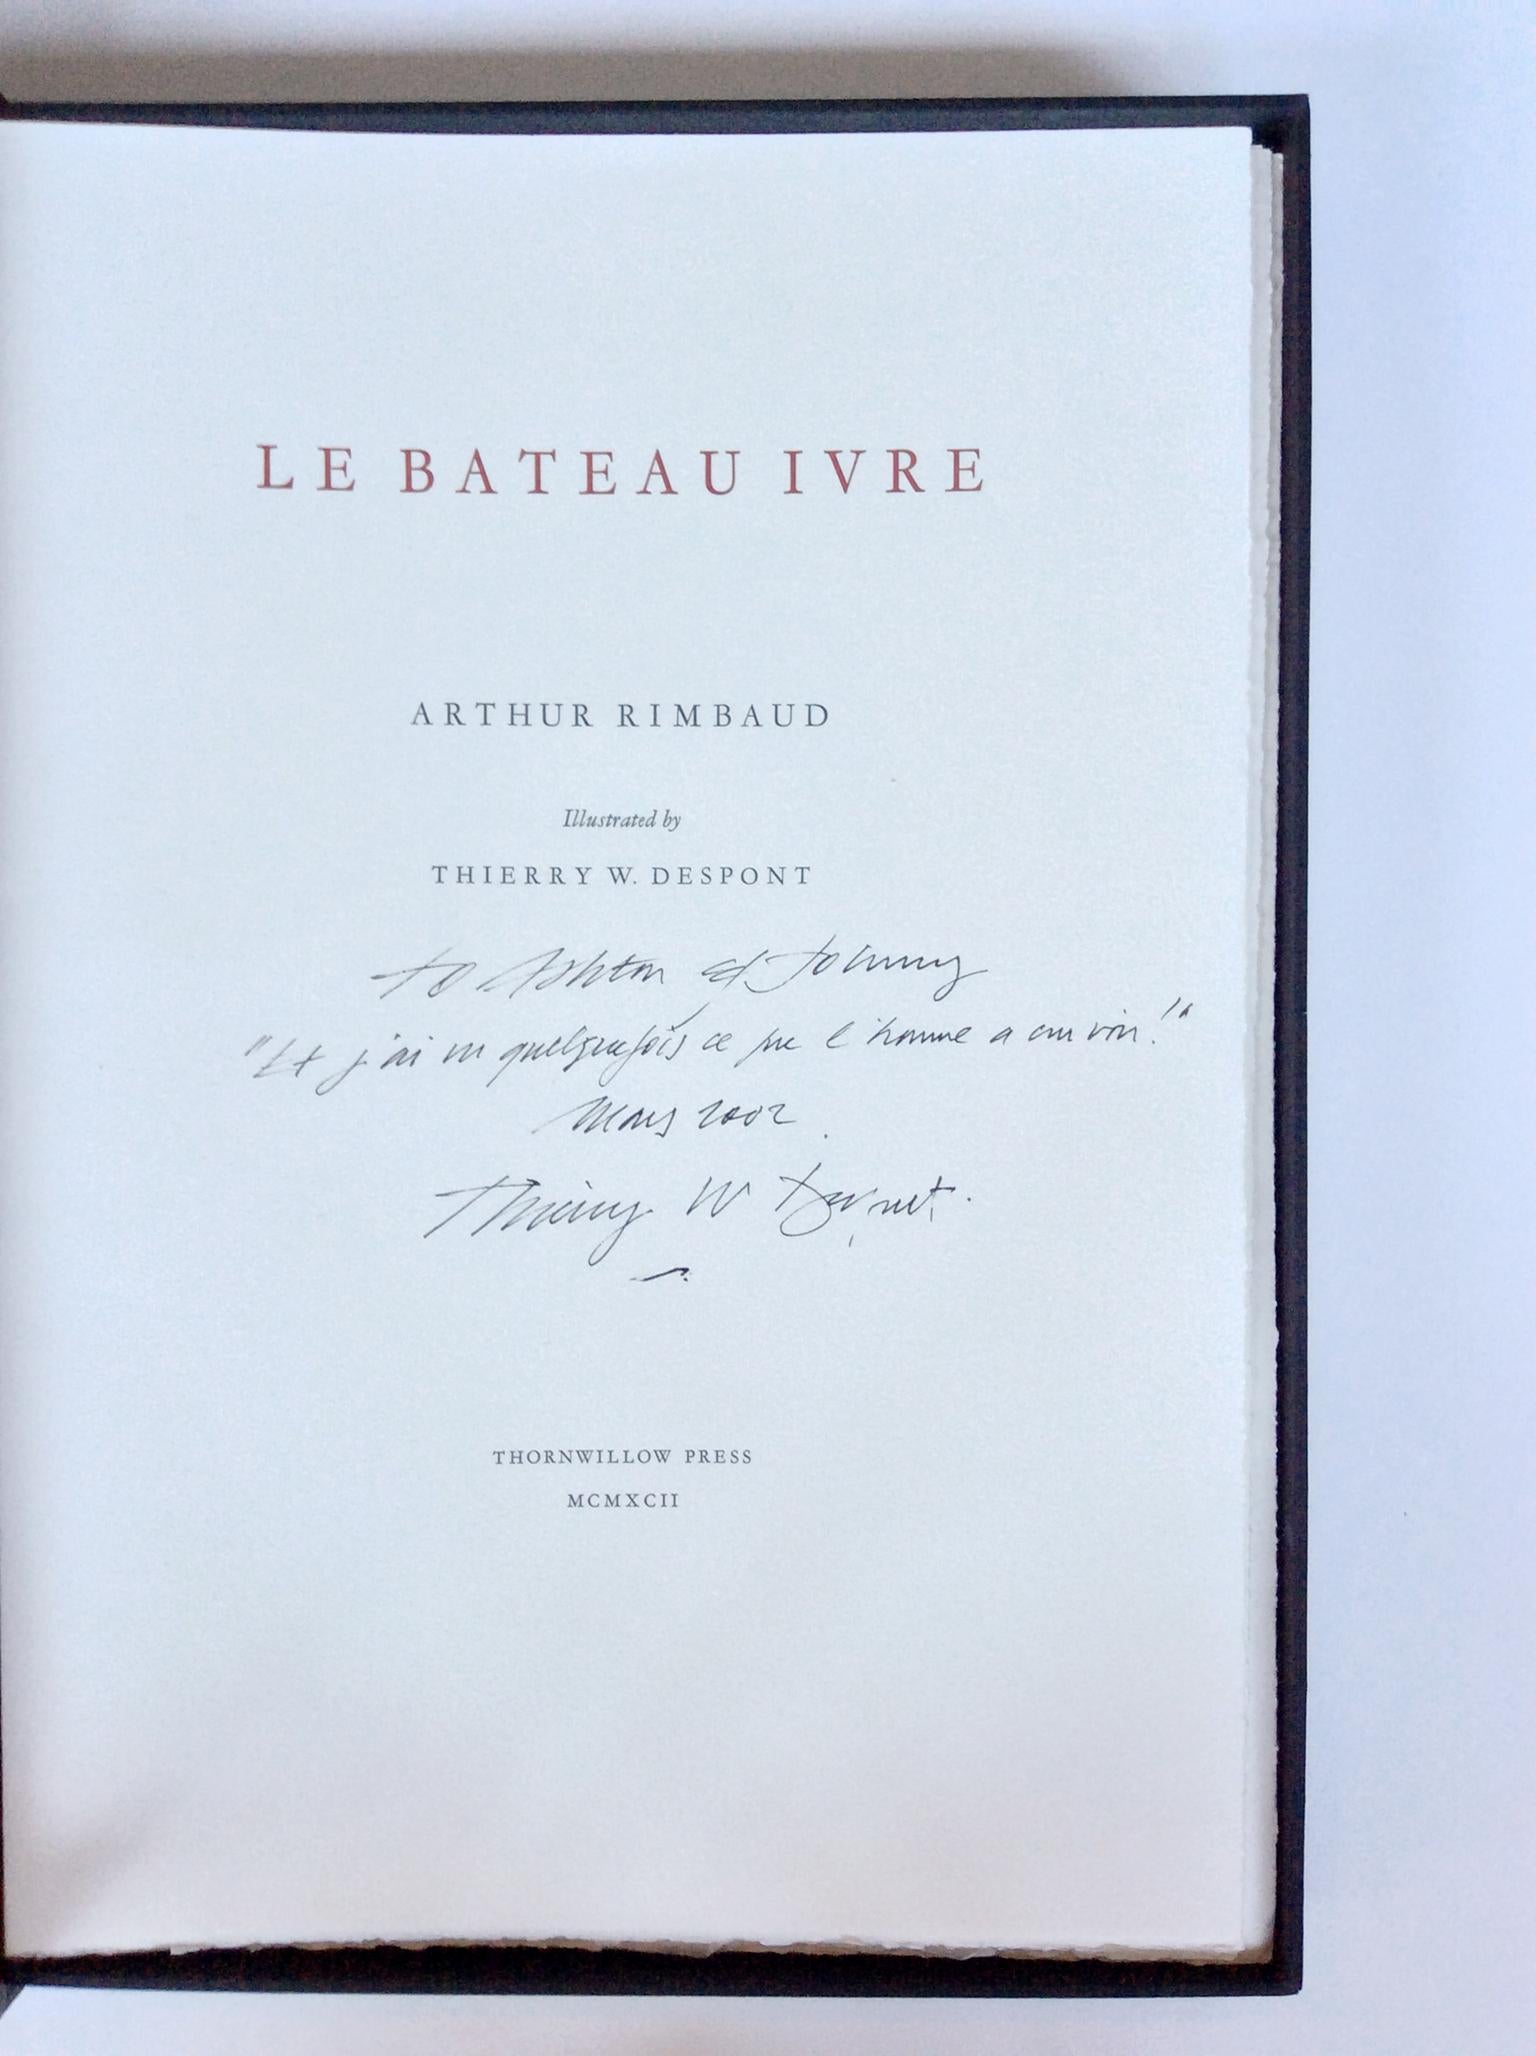 A first-edition portfolio of lithographs by the artist & architect Thierry Despont. Published by in 1992 by Thornwillow Press. This portfolio is unique in that Despont has signed the title page, with a dedication to two friends. Despont's lithograph